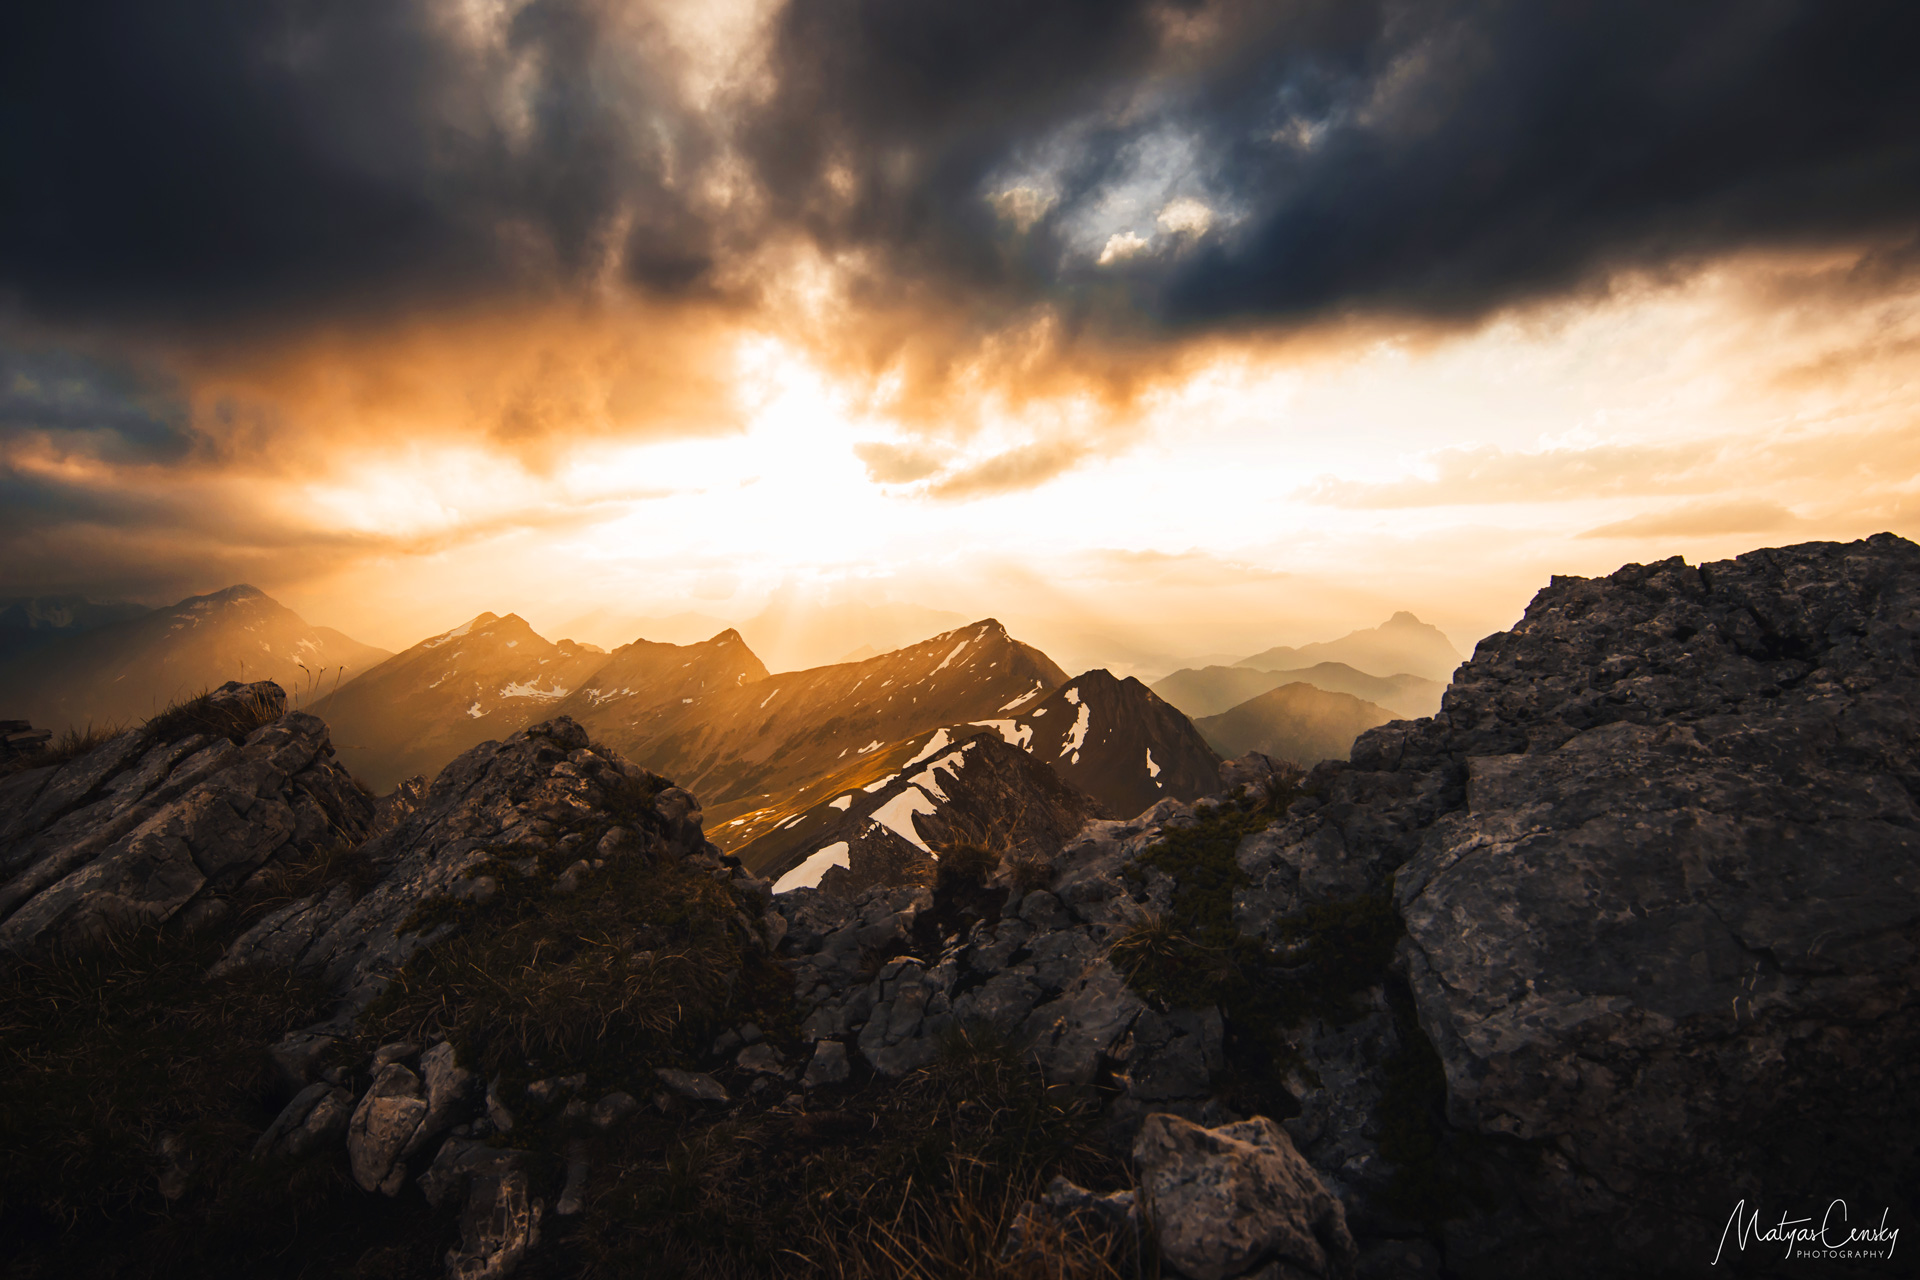 Photo of a sunset after a storm with mountain tops in the backgroung and rocks in the foreground taken from the top of Ups Spitze, Austria.